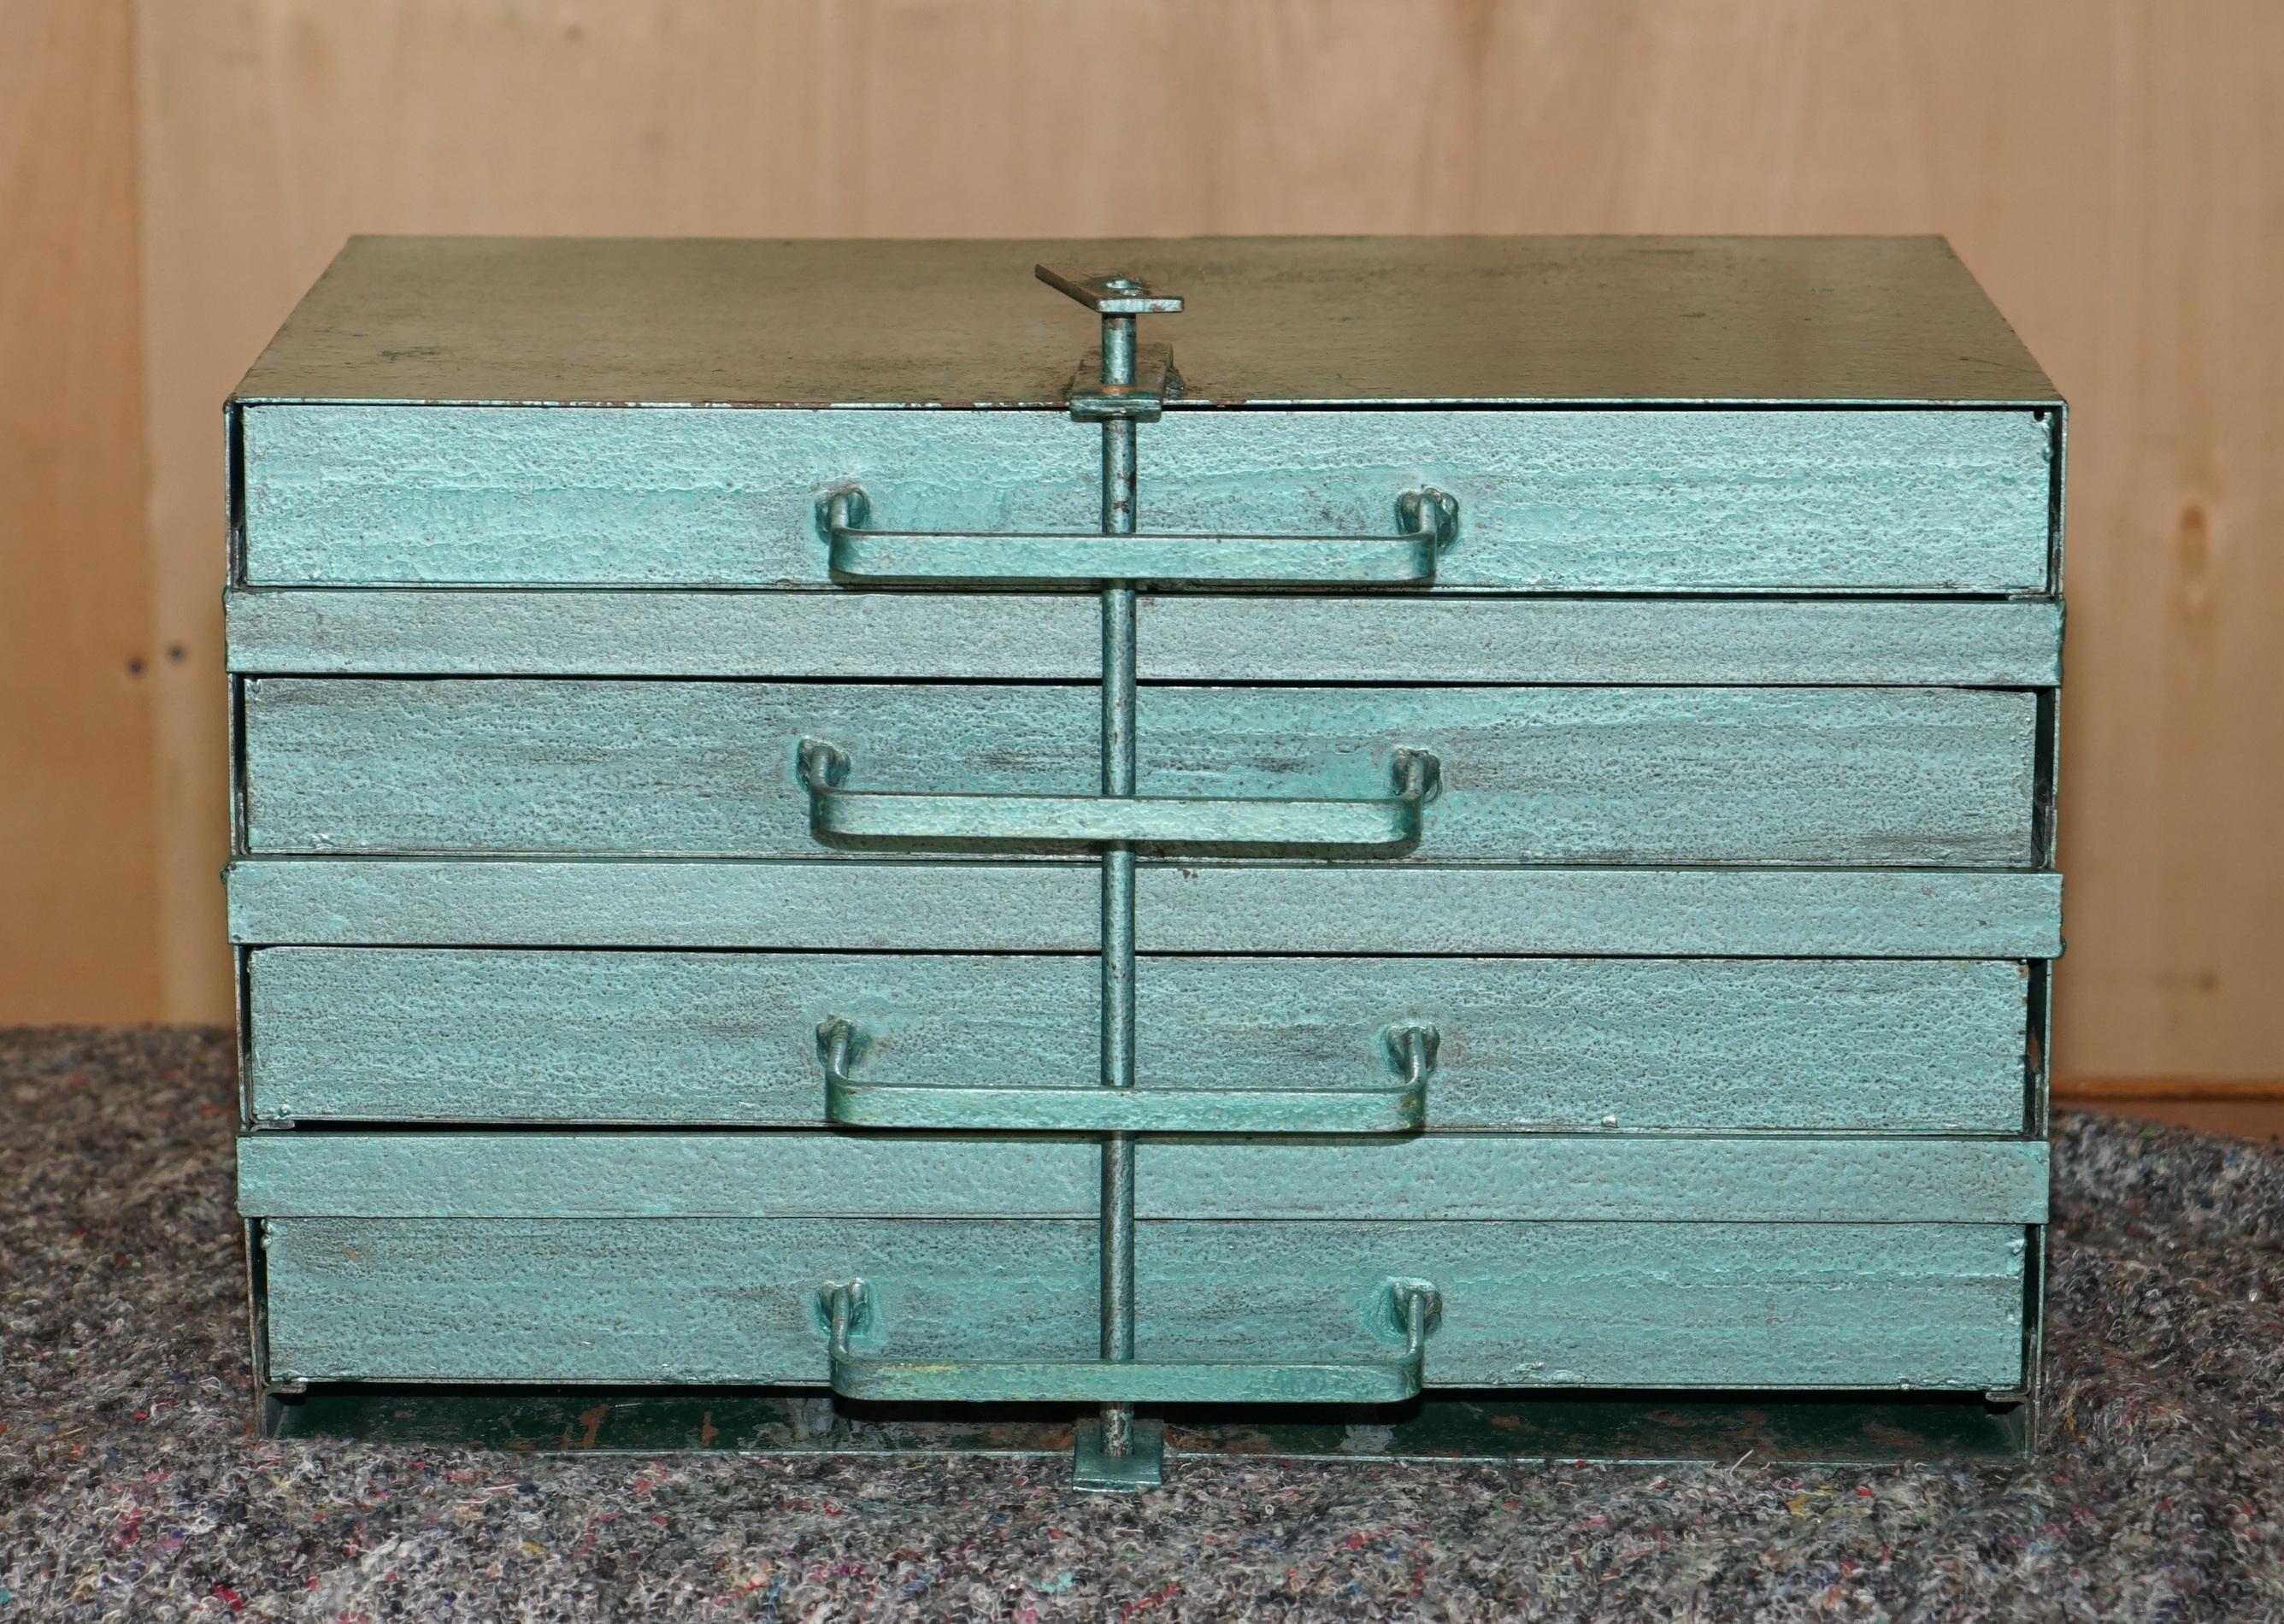 Royal House Antiques

Royal House Antiques is delighted to offer for sale this original, stunning condition teal coloured machinist work tool box in all steel with period lock and locking bar

Please note the delivery fee listed is just a guide, it